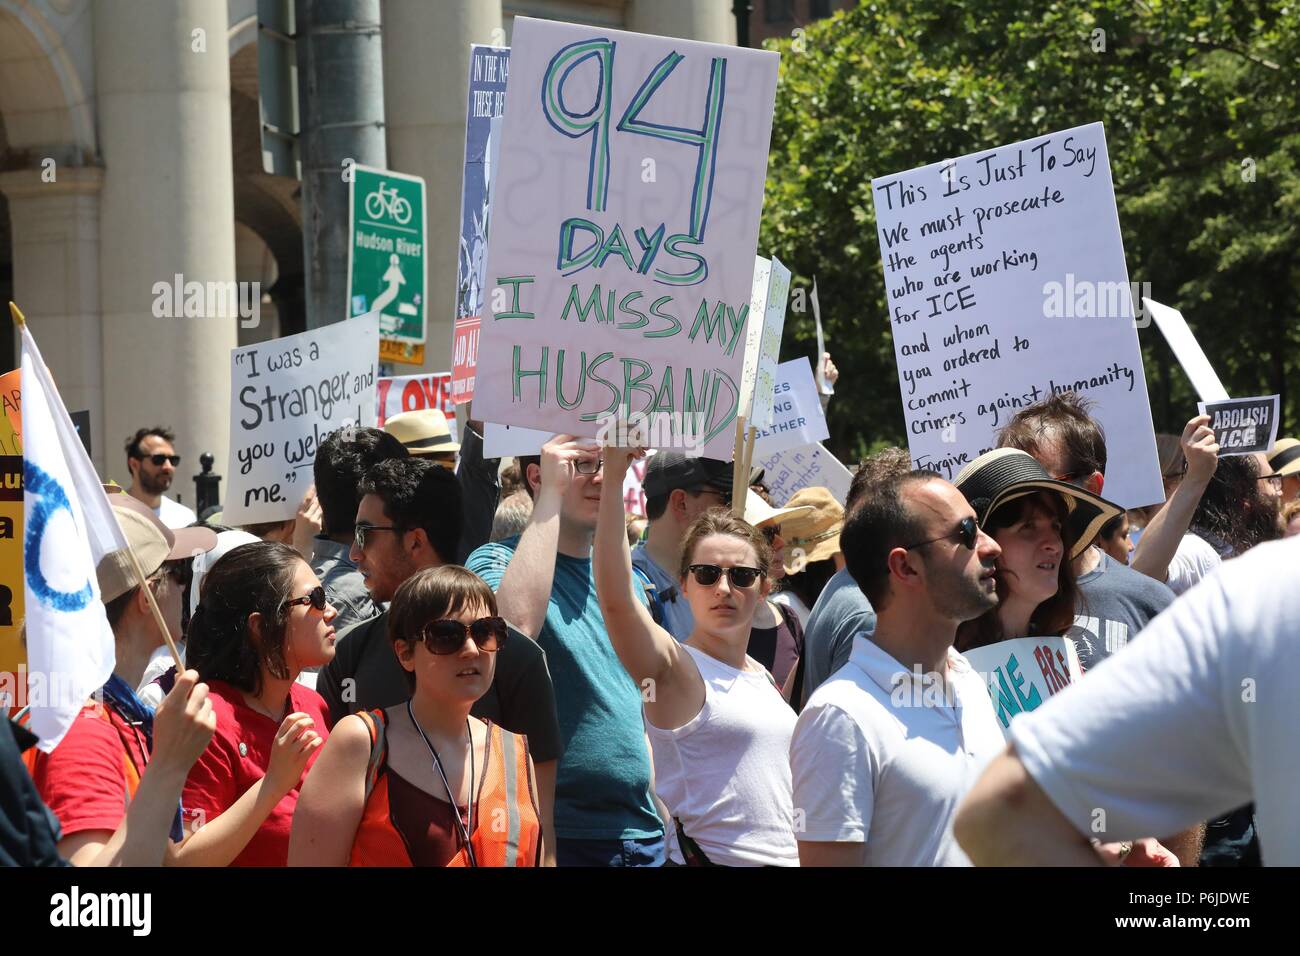 New York, USA. 30th June, 2018. People participate in the 'End Family Separation NYC' rally at downtown Manhattan in New York, the United States, on June 30, 2018. Tens of thousands of Americans marched and rallied across the United States to protest the Trump administration's 'zero tolerance' immigration policy resulting in over 2,000 children separated from their families who crossed the border illegally. Credit: Zhou Sa'ang/Xinhua/Alamy Live News Stock Photo